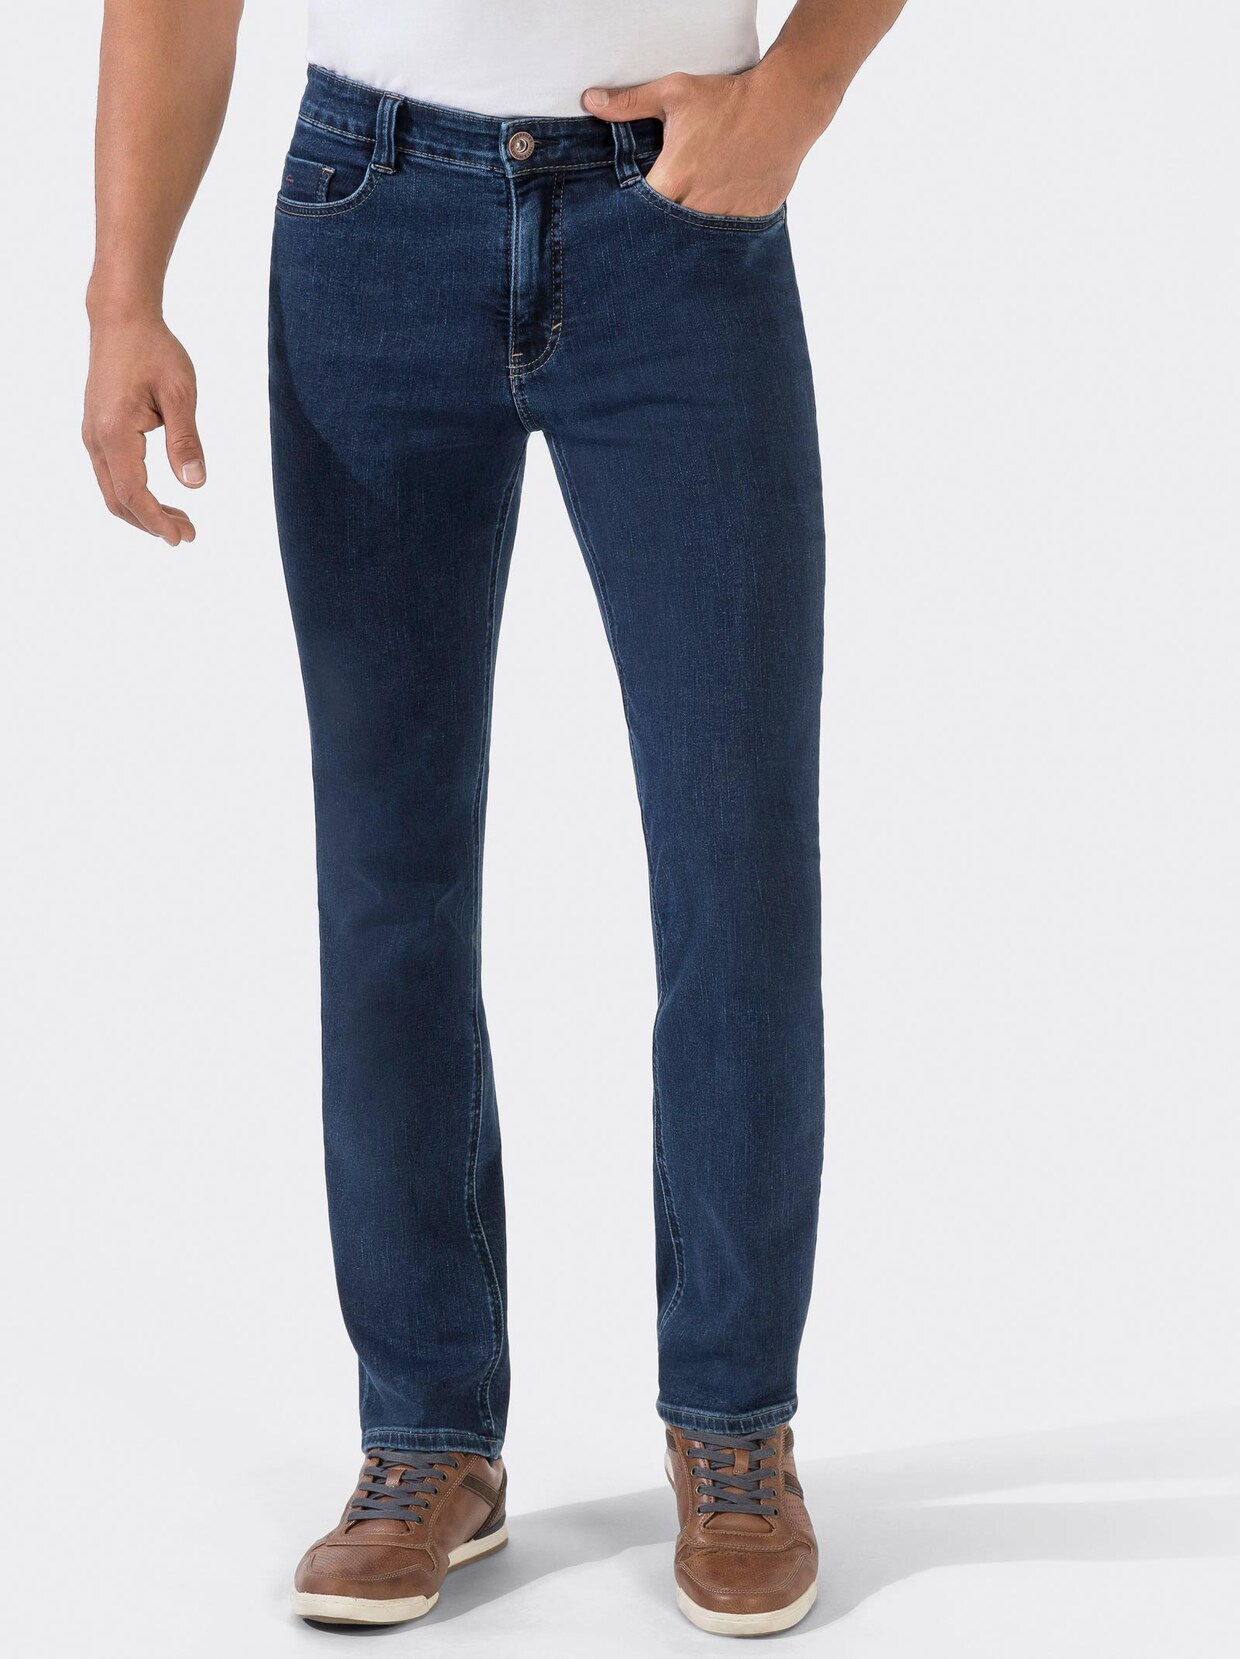 jeans - darkblue stone-washed